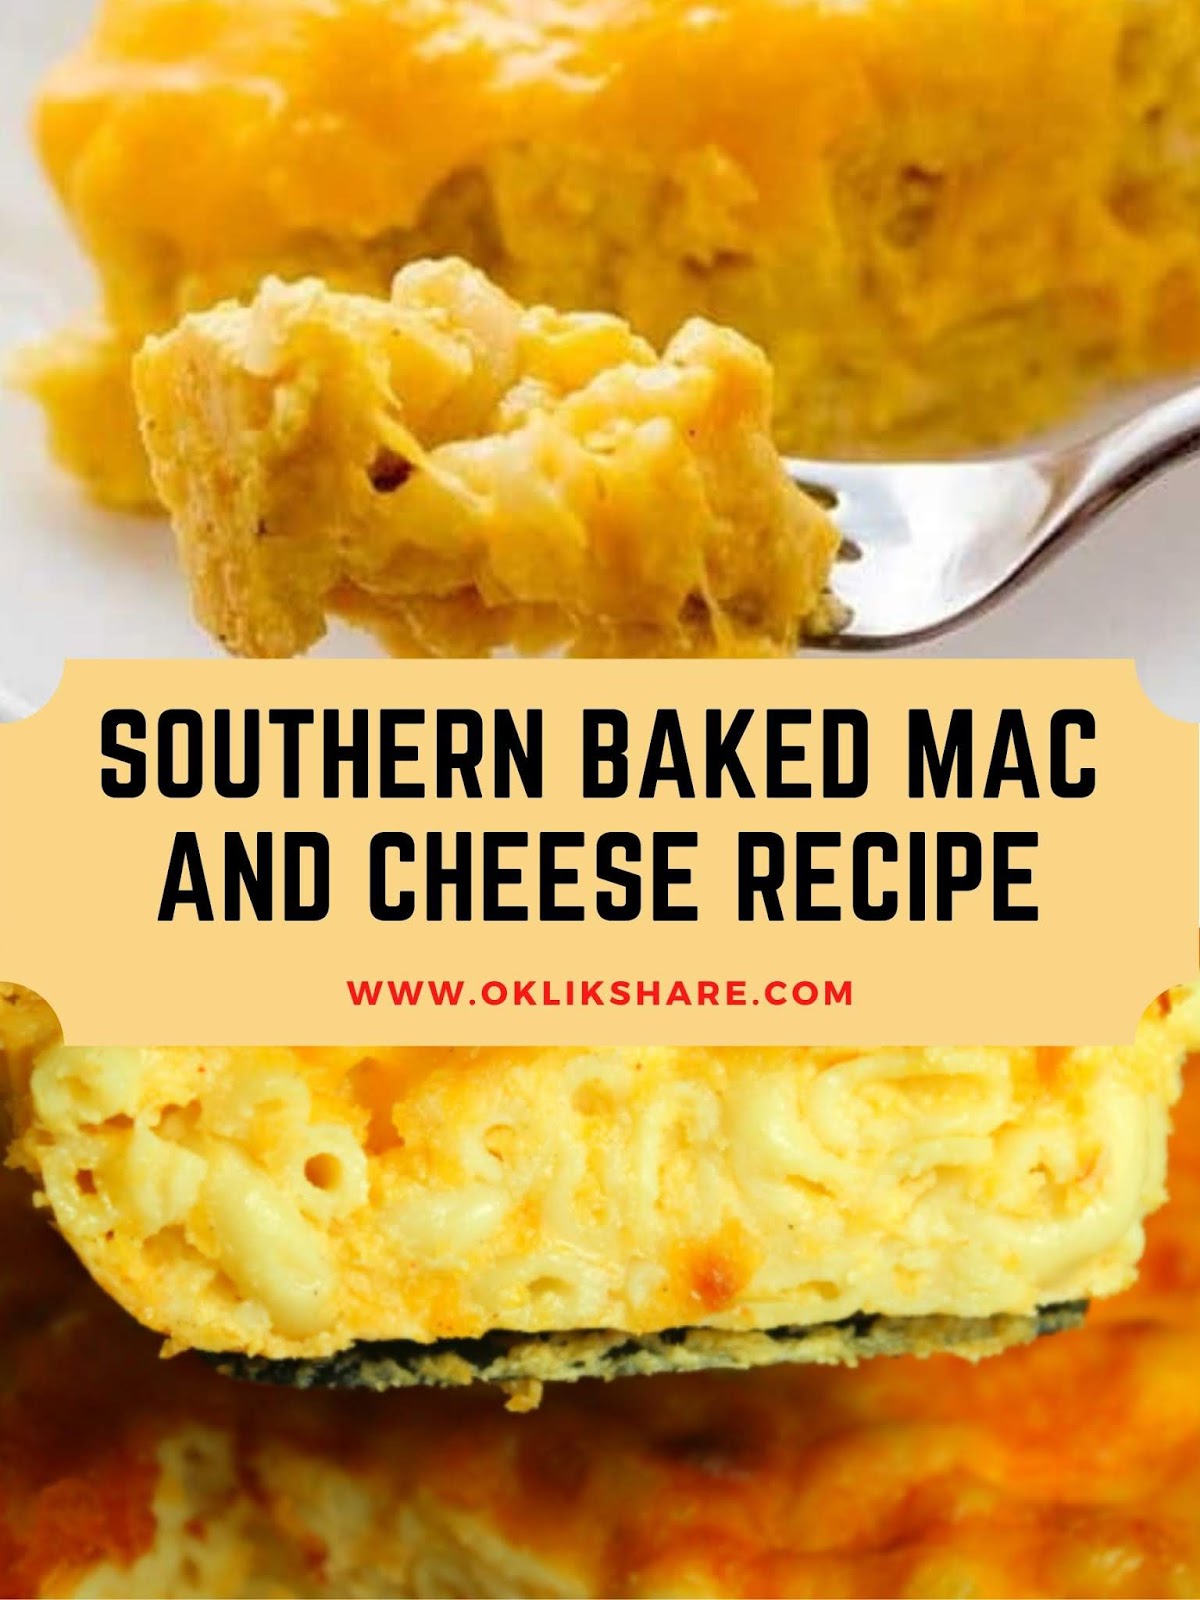 Southern Baked Mac and Cheese Reipe